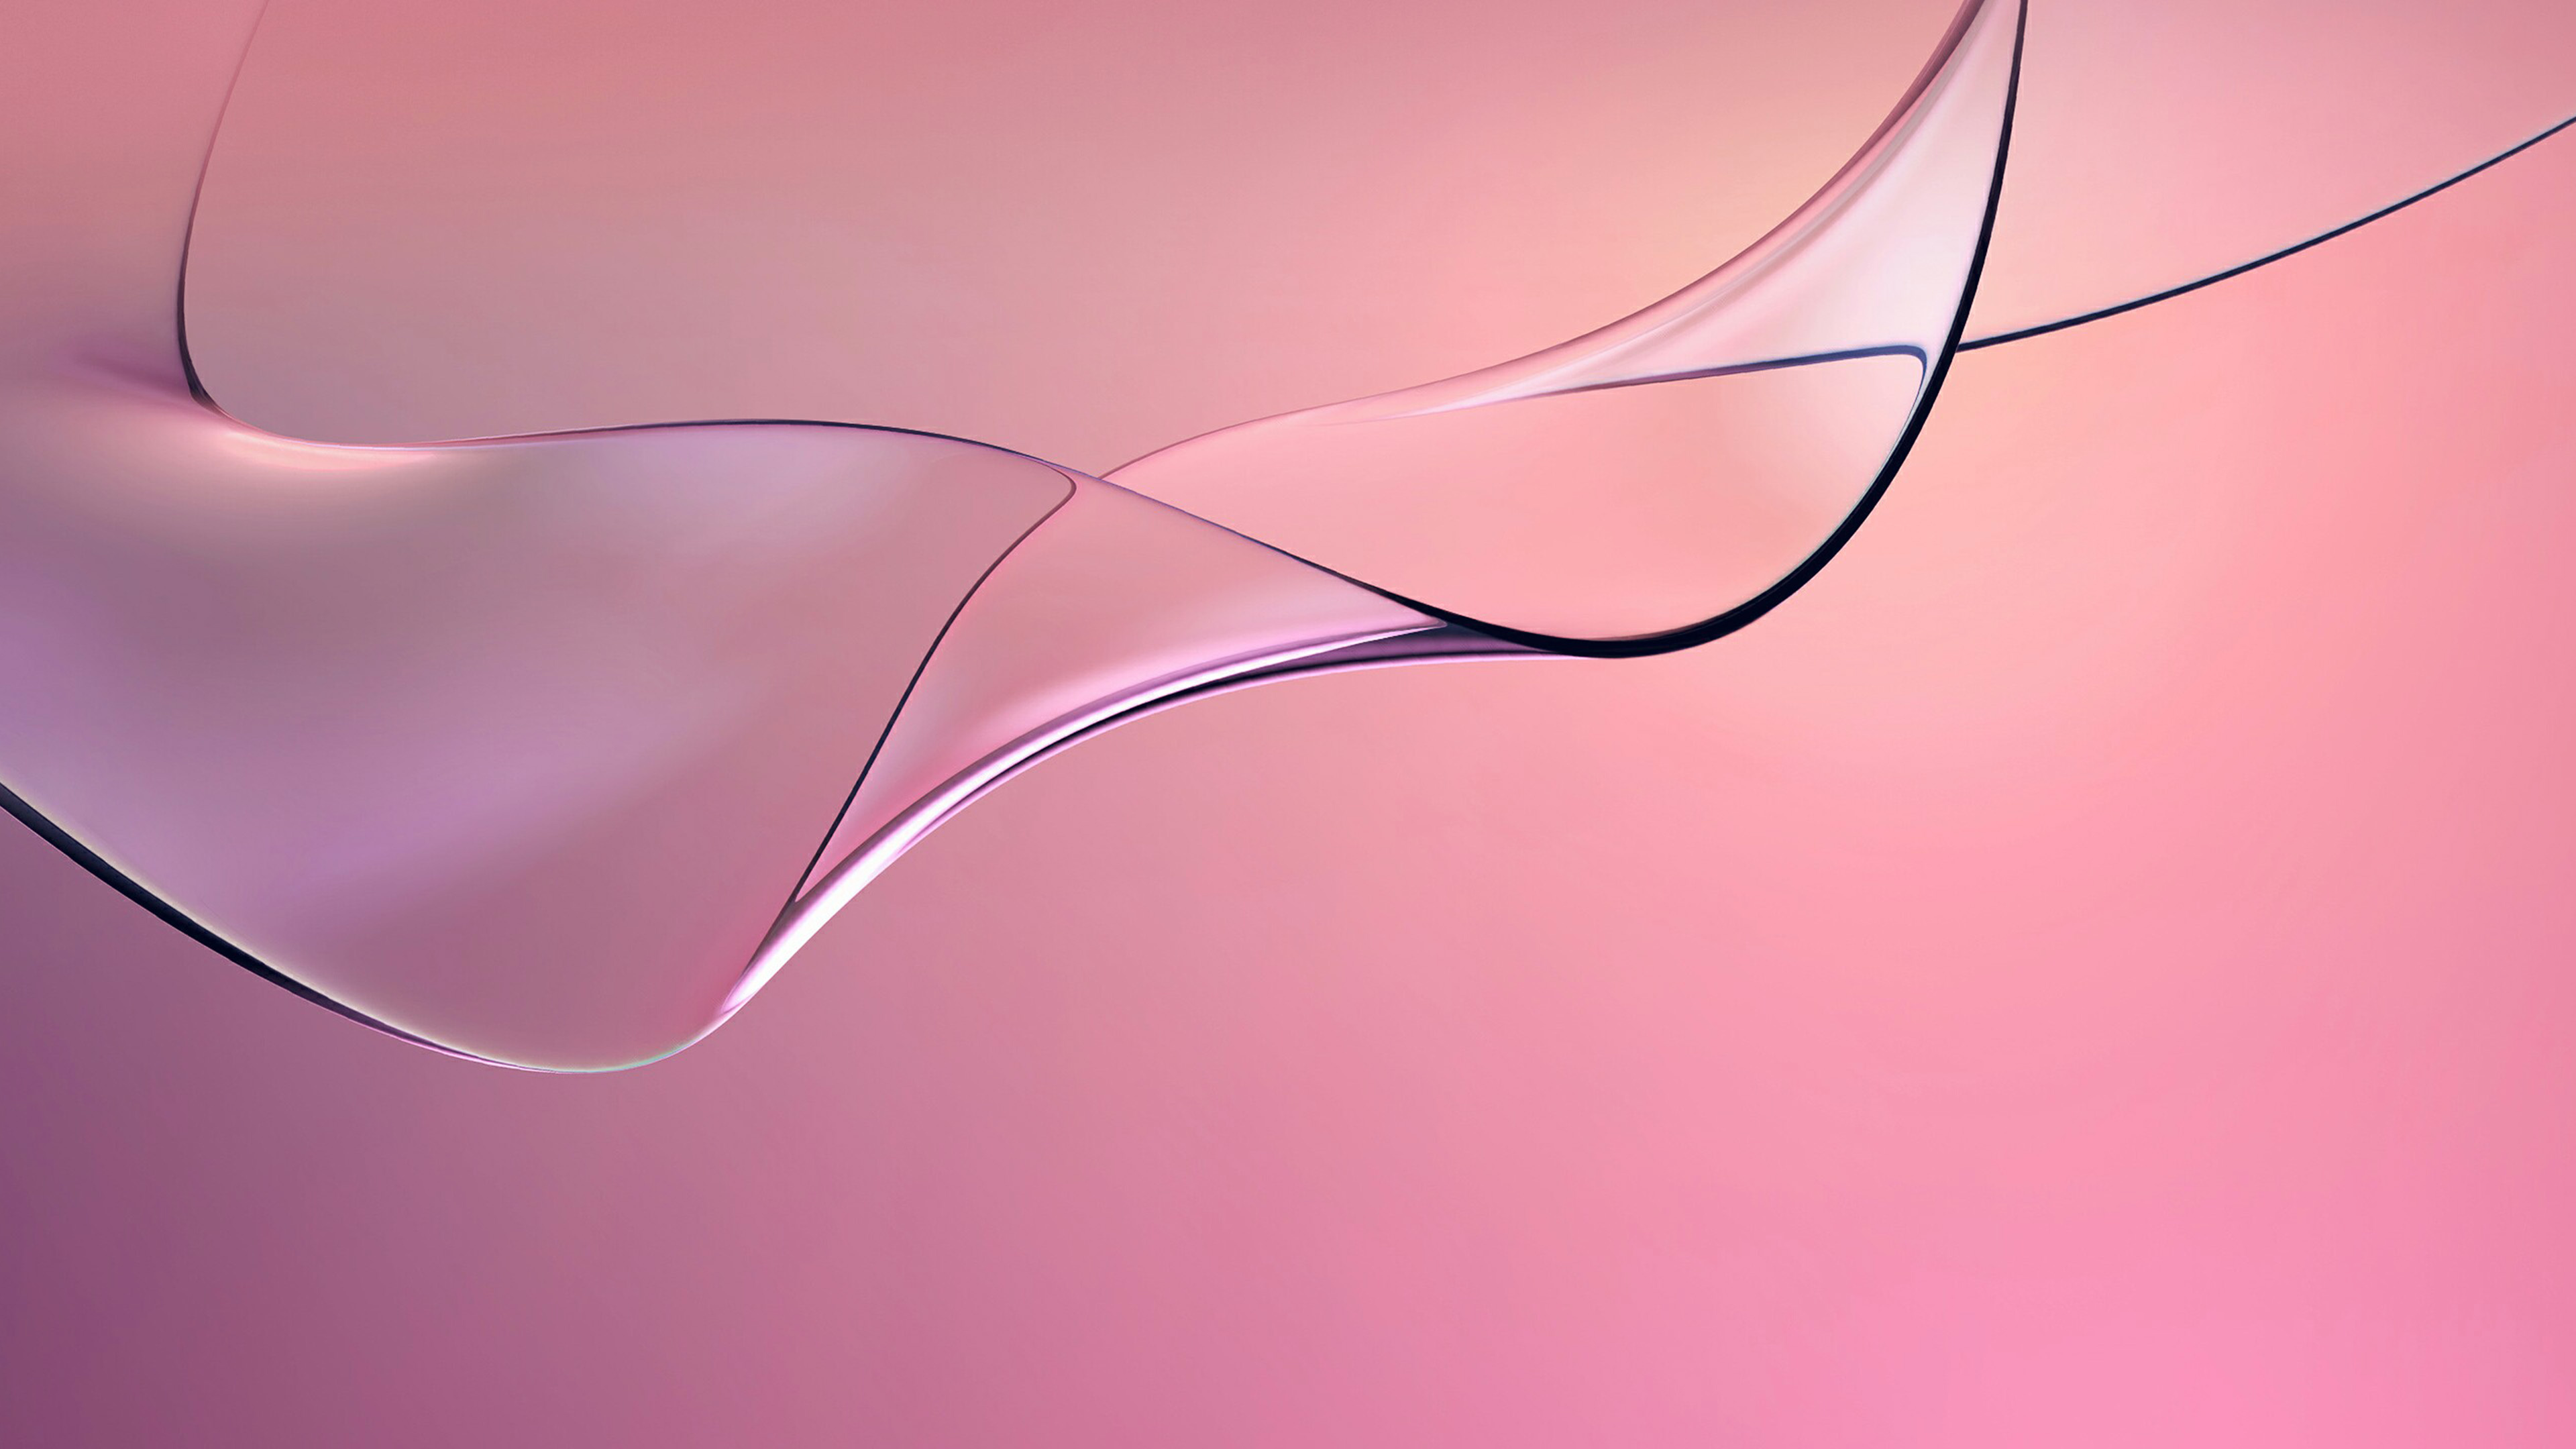 White Coated Wire on Pink Textile. Wallpaper in 3840x2160 Resolution